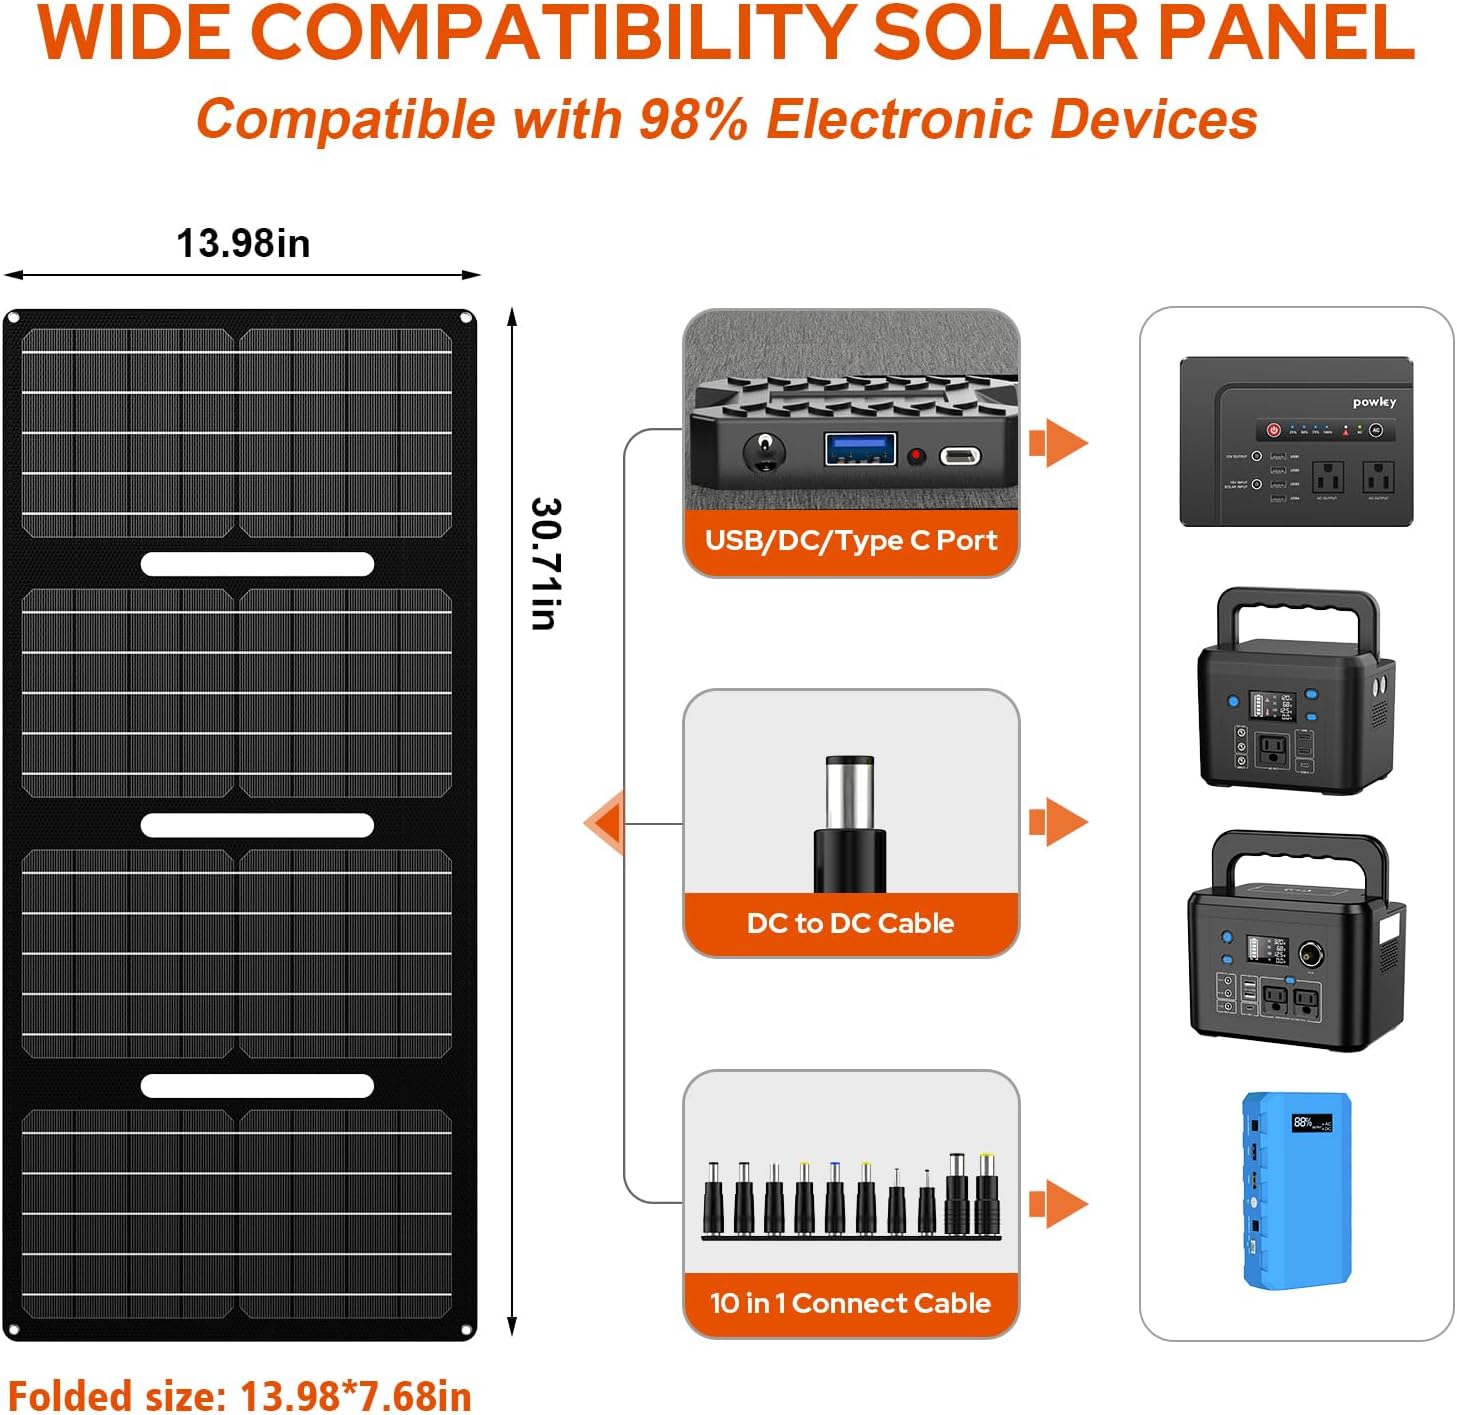 Powkey Solar Generator with Panel 146Wh/200W Portable Power Station with Solar Panel 40W